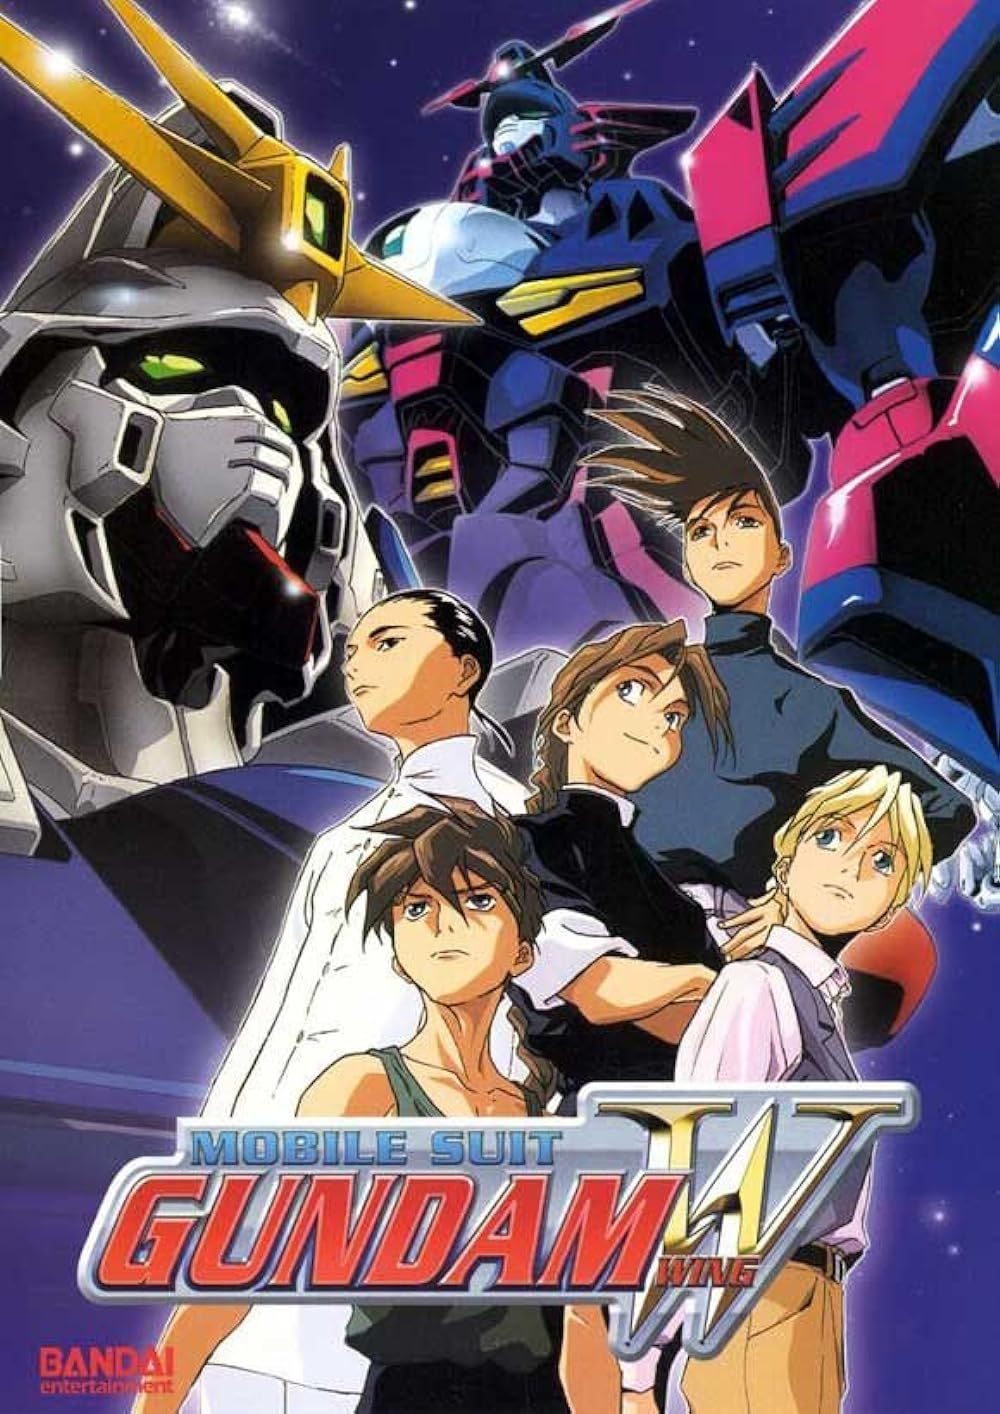 The main characters of Mobile Suit Gundam Wing against mecha robots on the poster of the series